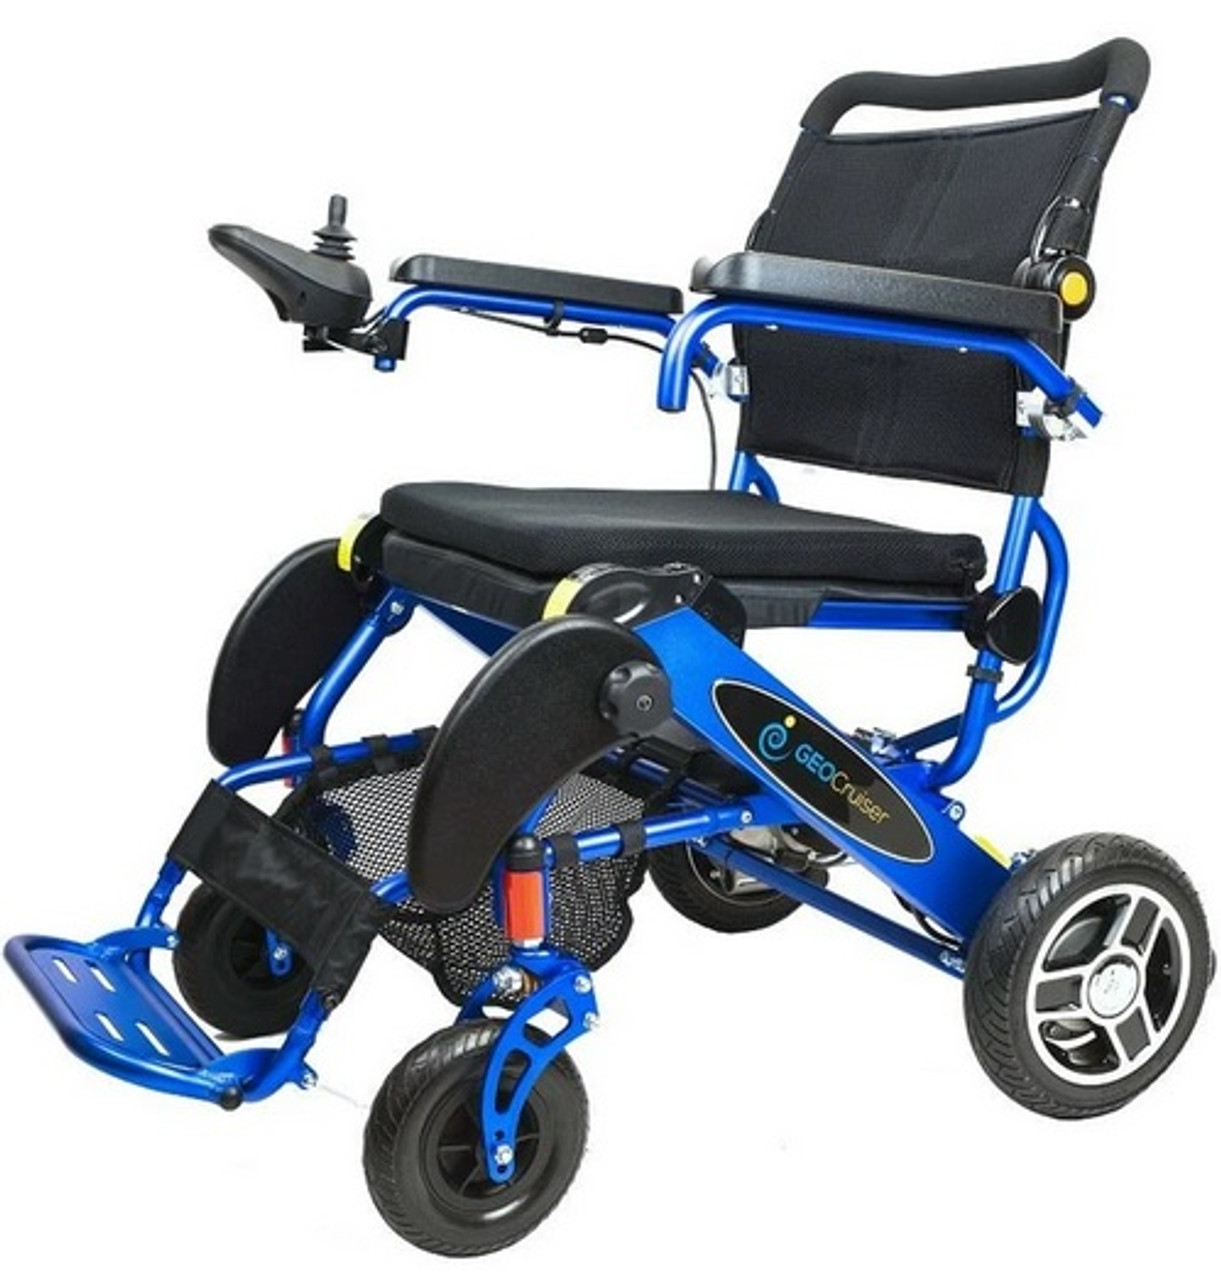 Geo Cruiser Lightweight Foldable Power Chair, by Pathway Mobility